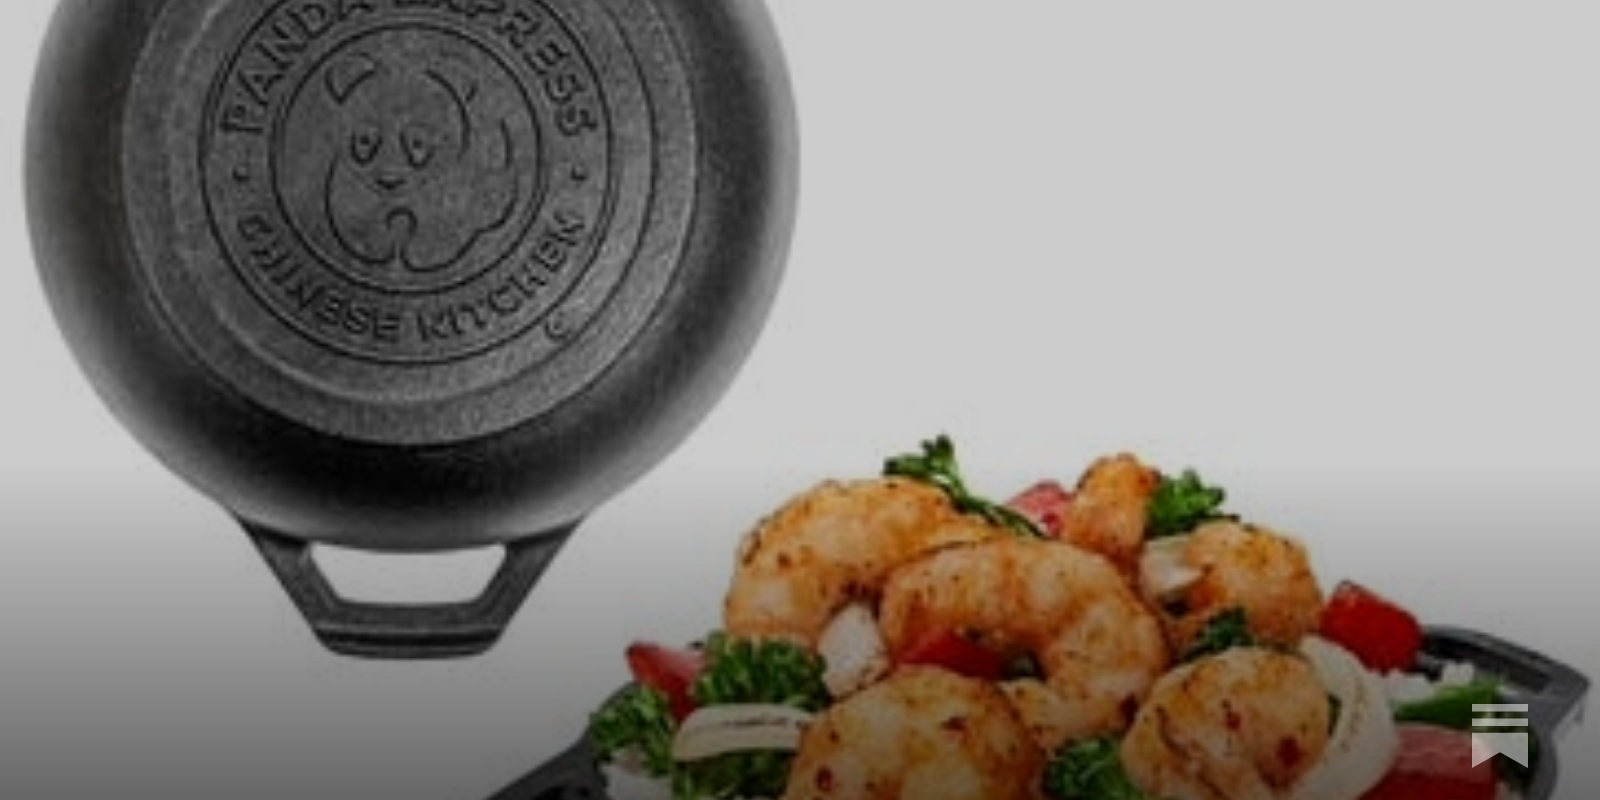 Panda Express Mini Wok from Lodge Cast Iron LIMITED EDITION VERY